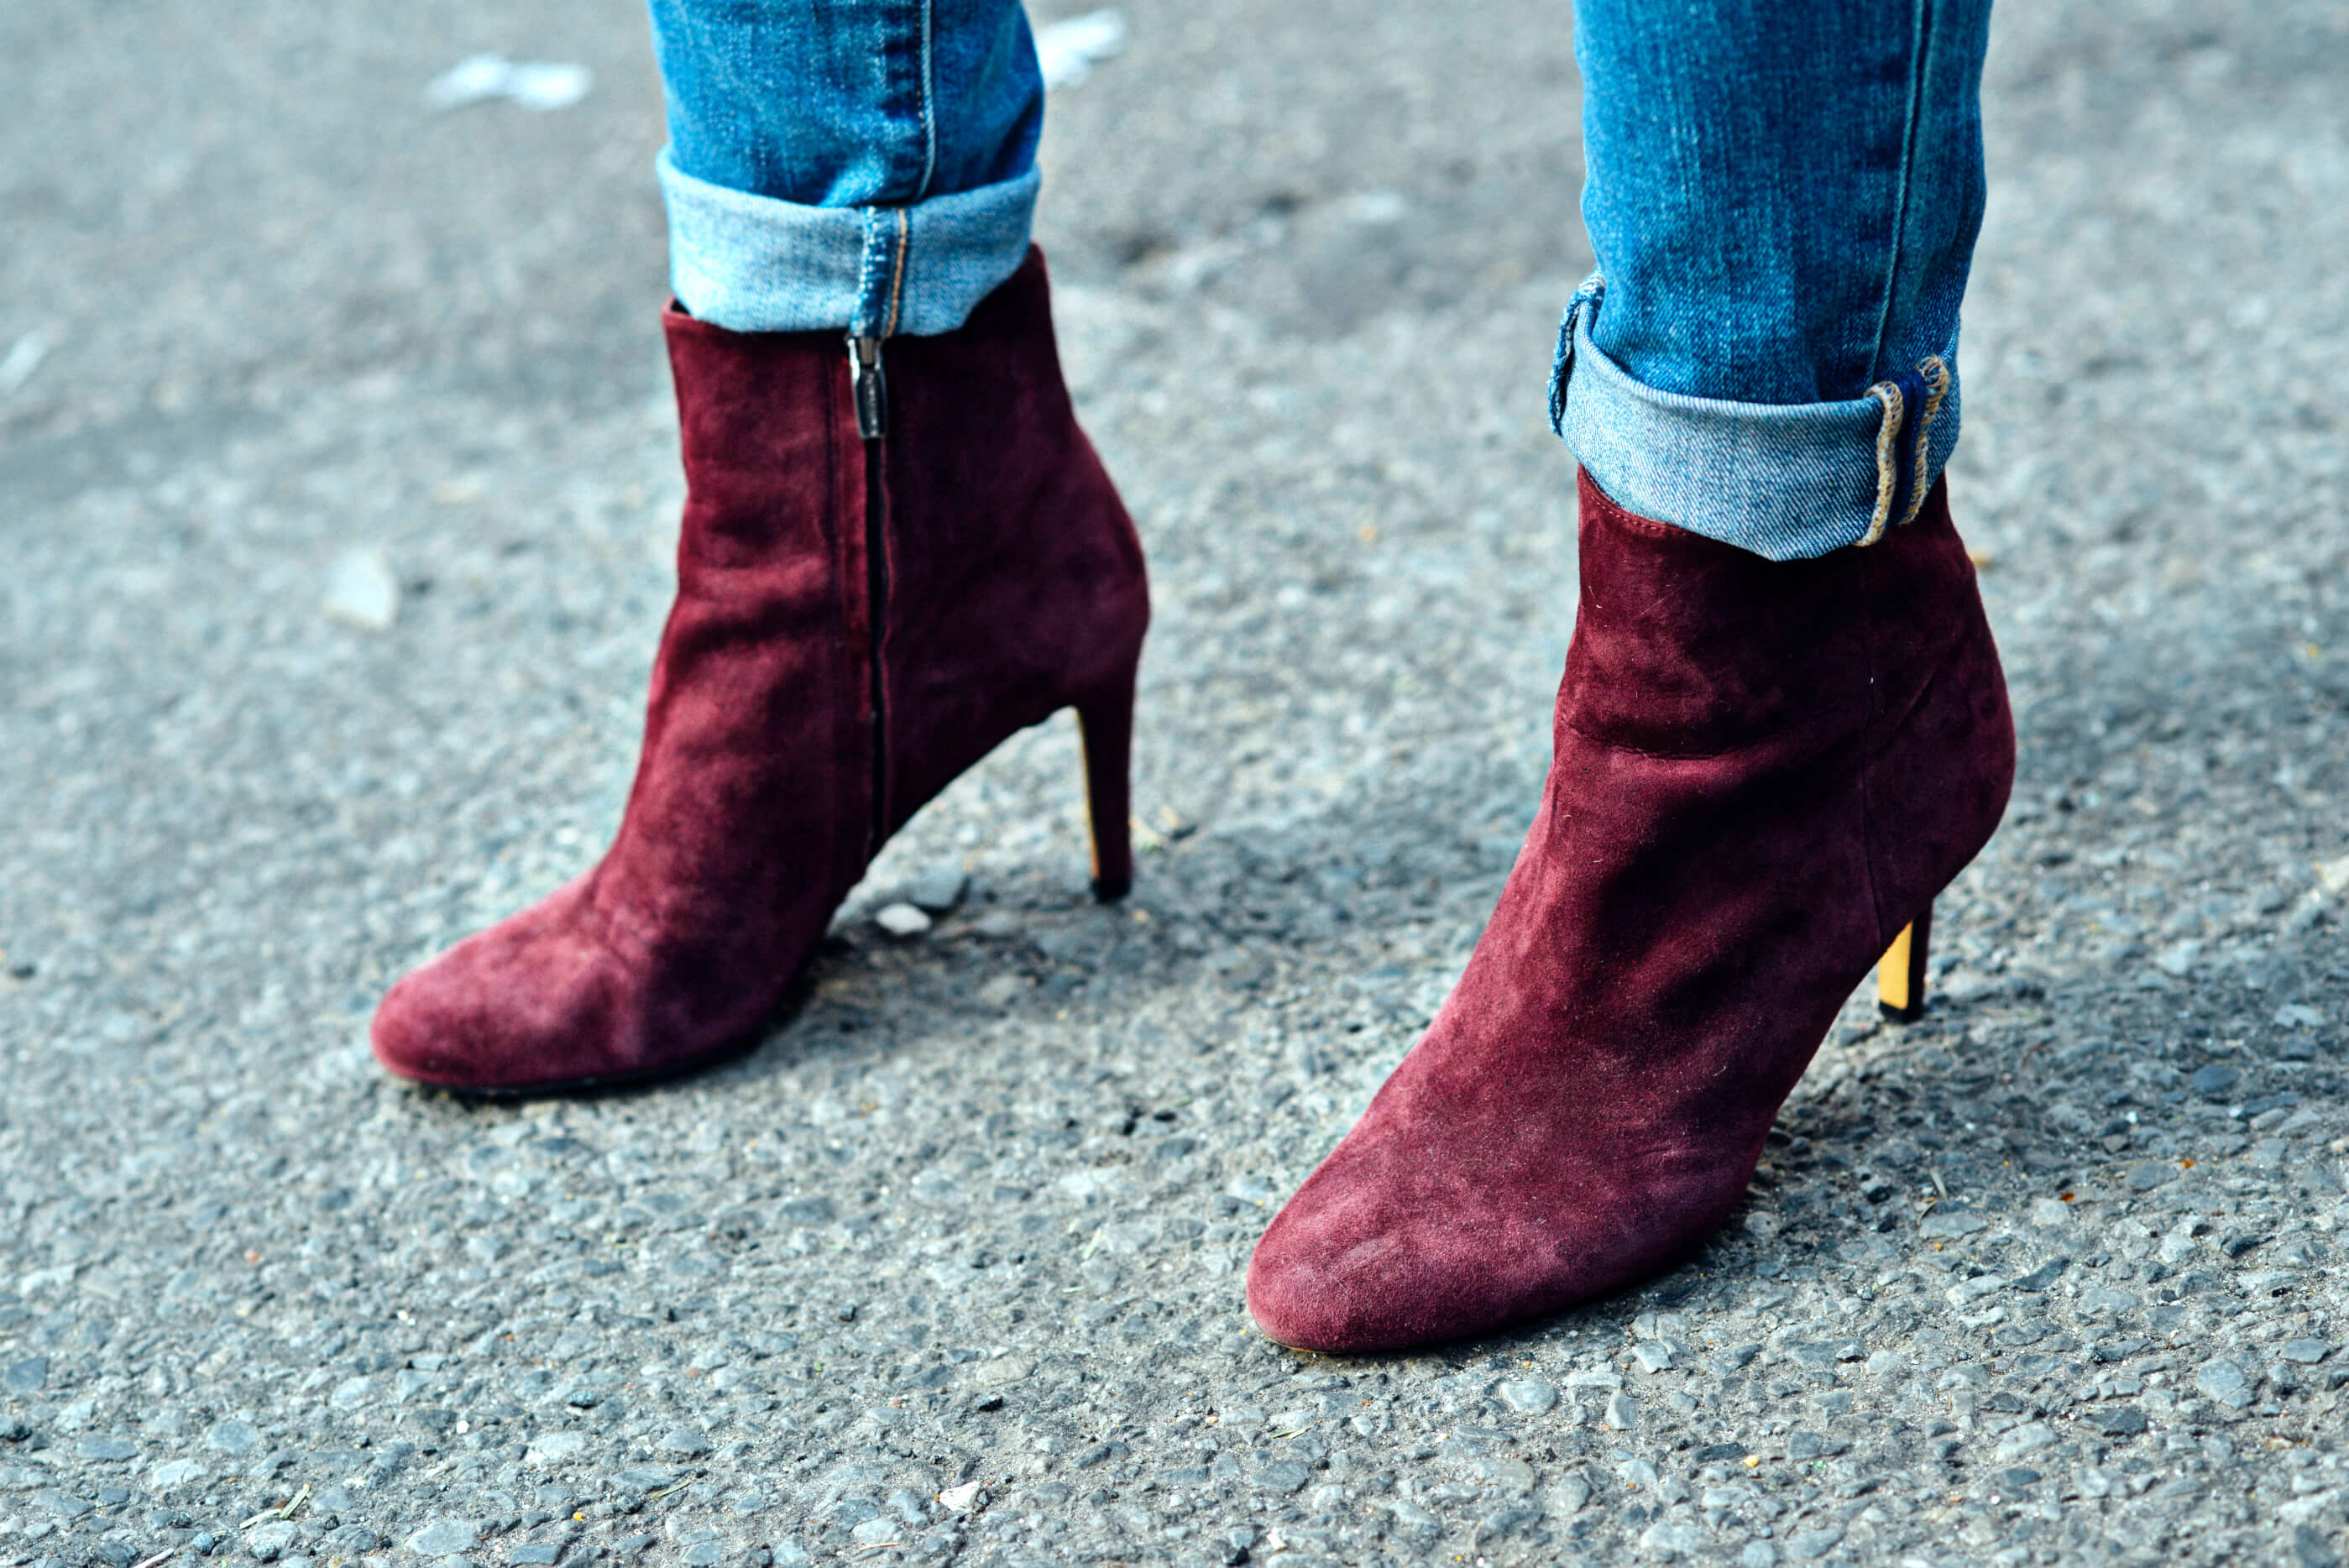 Vince Camuto Red Wine Booties, Tilden of To Be Bright